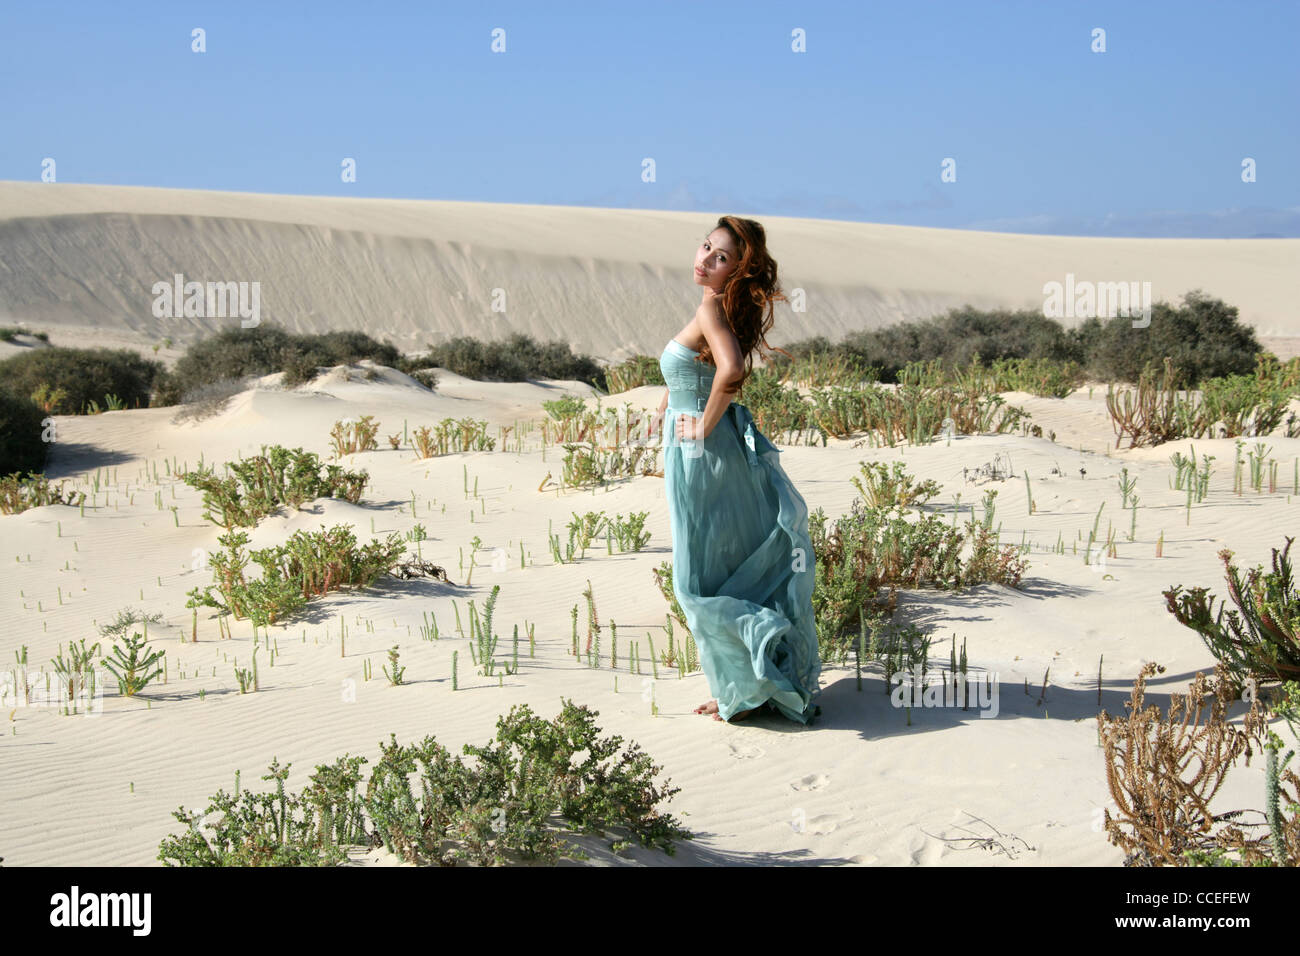 Indonesian Girl in a Turquoise Dress Running on Sand Dunes, Fuerteventura, Canary Islands, Spain. Stock Photo